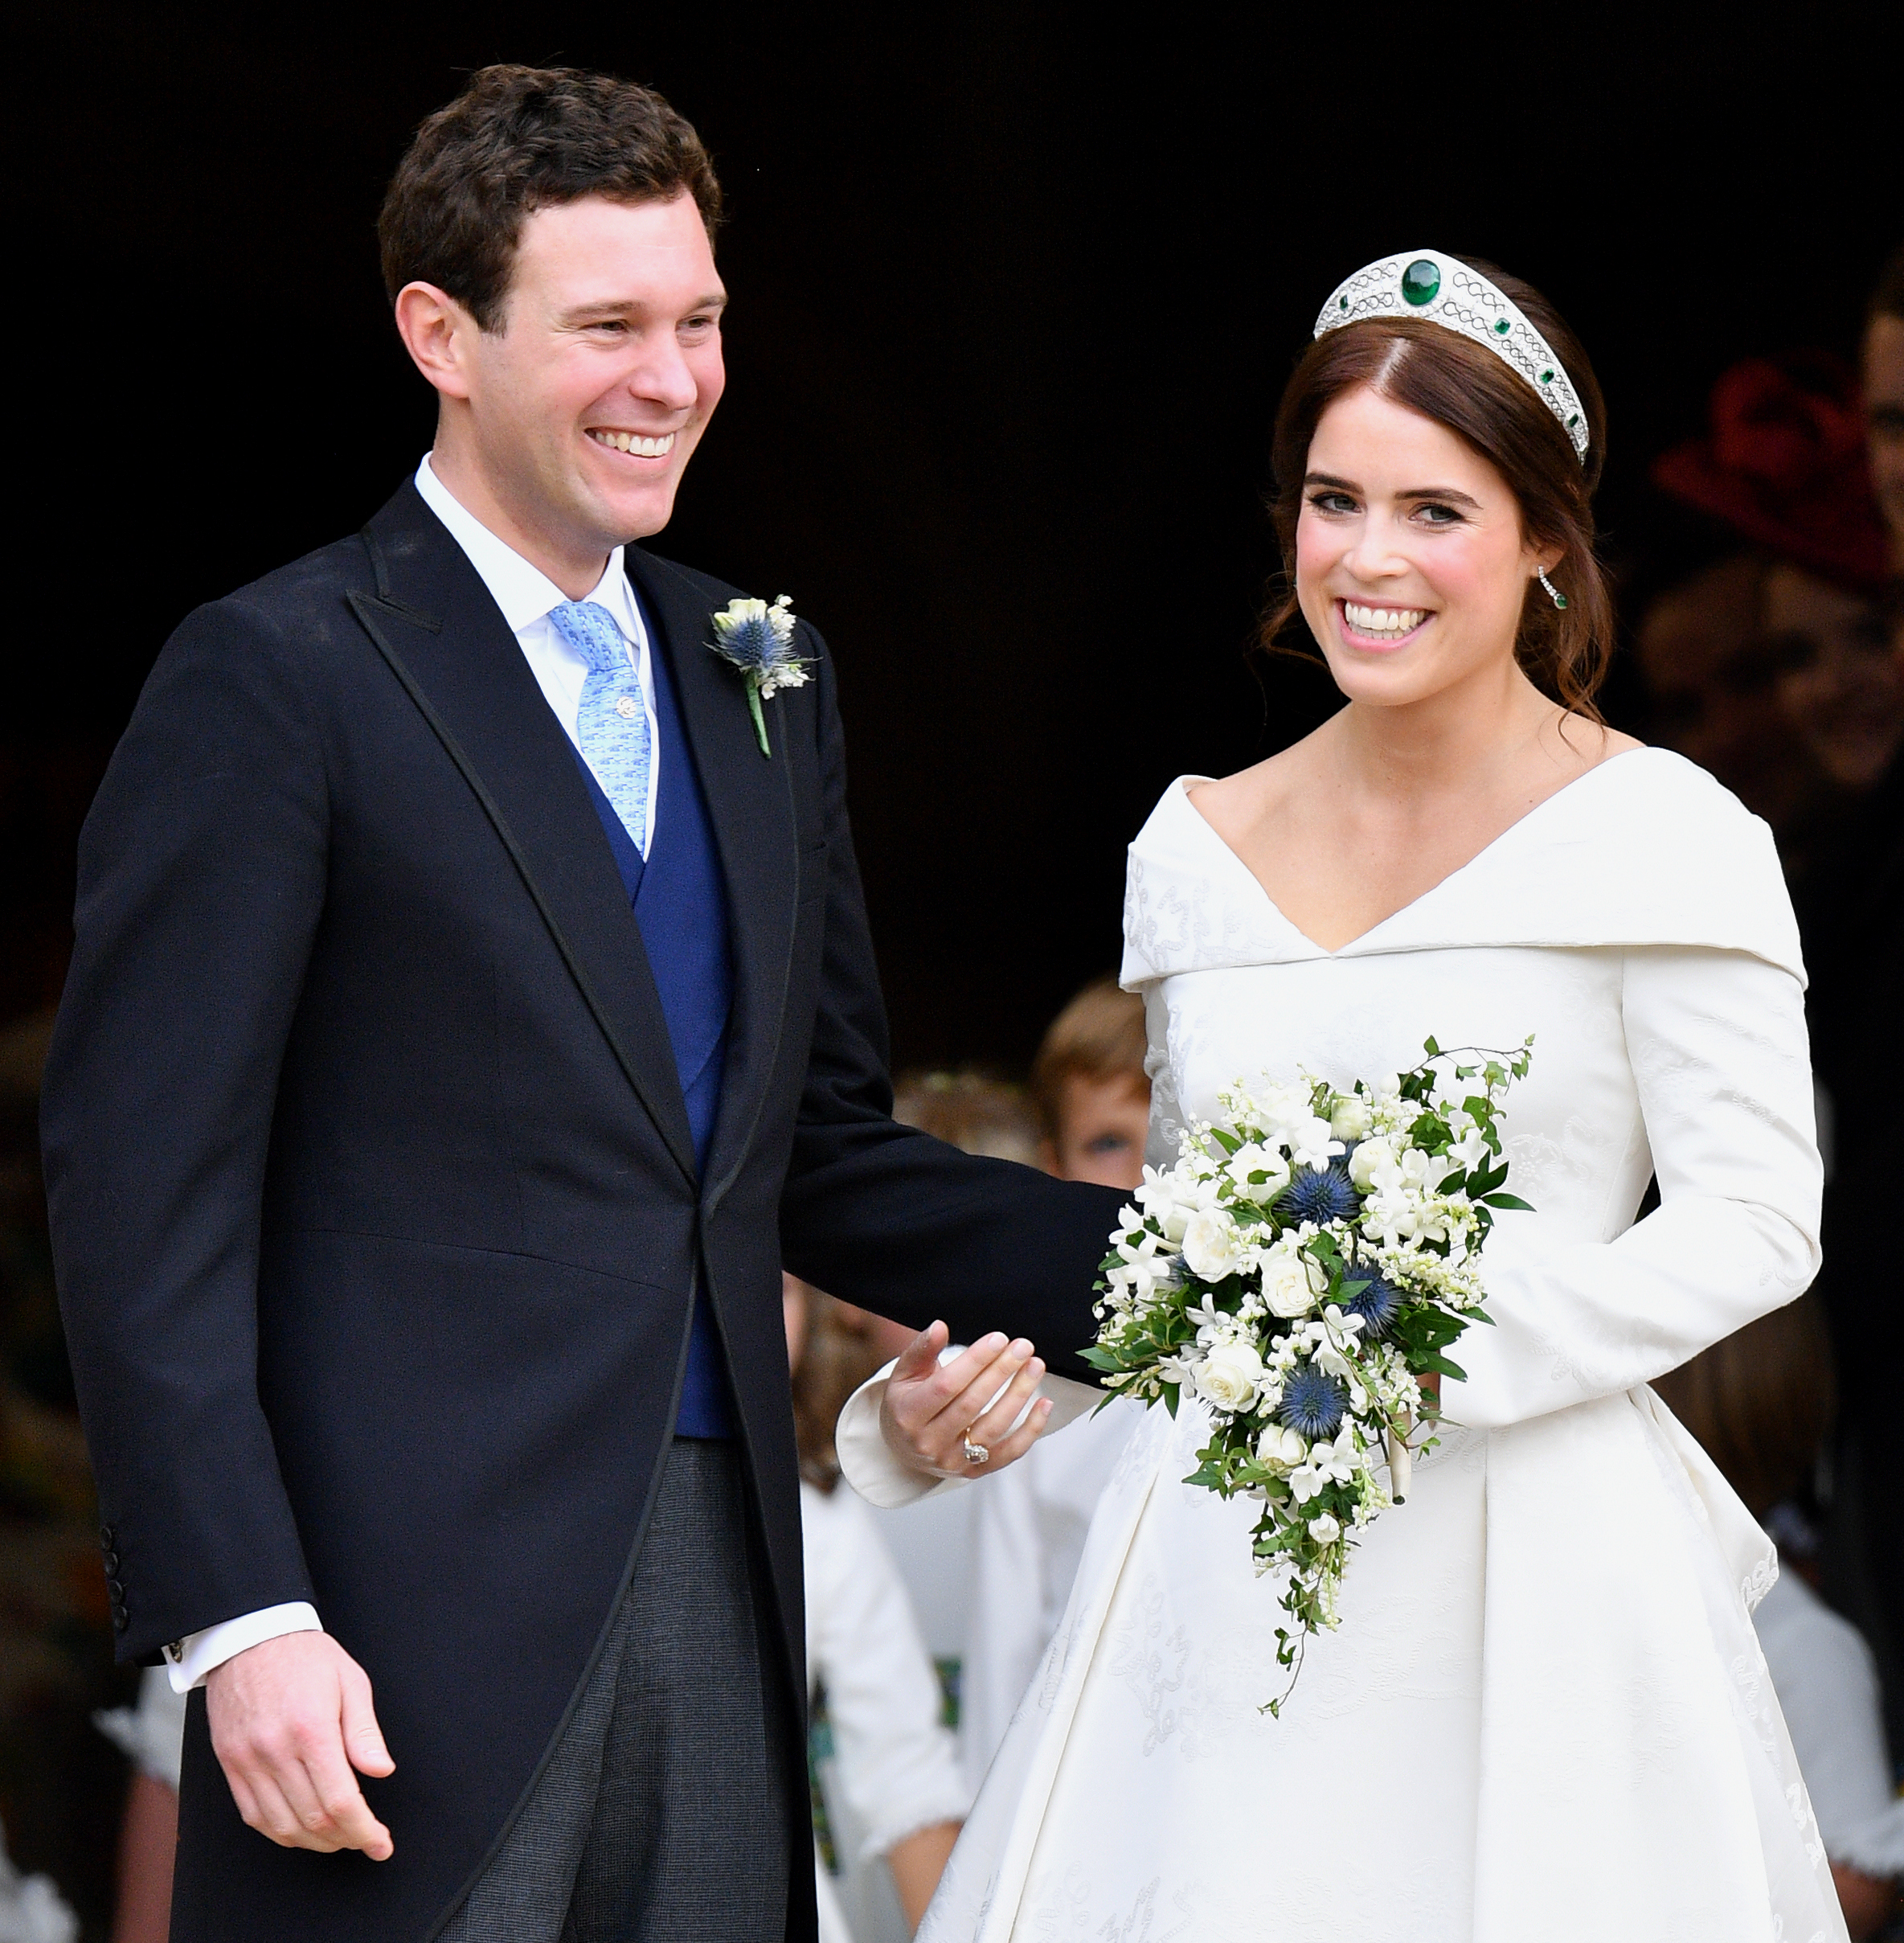 Jack Brooksbank and Princess Eugenie's wedding day at St. George's Chapel in Windsor, England, on October 12, 2018.